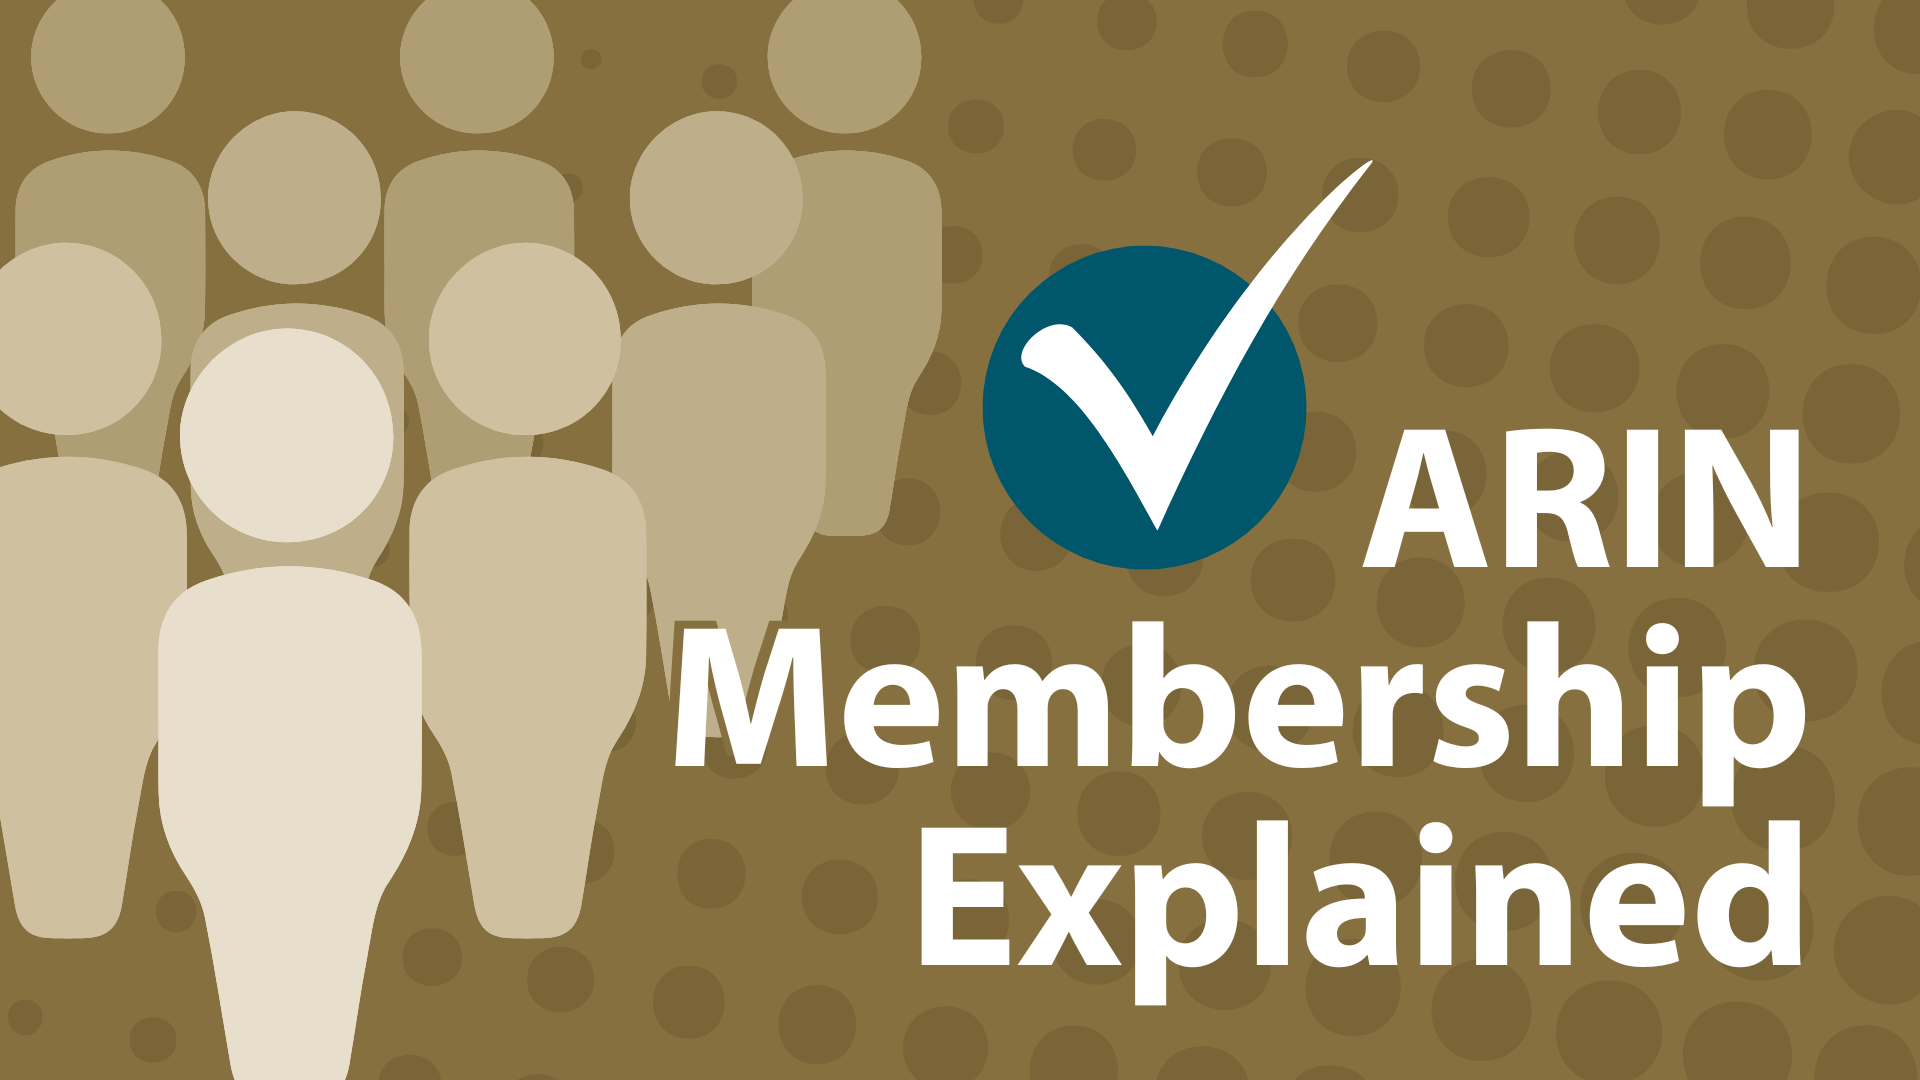 ARIN Membership Explained: What It Means and Why It Matters